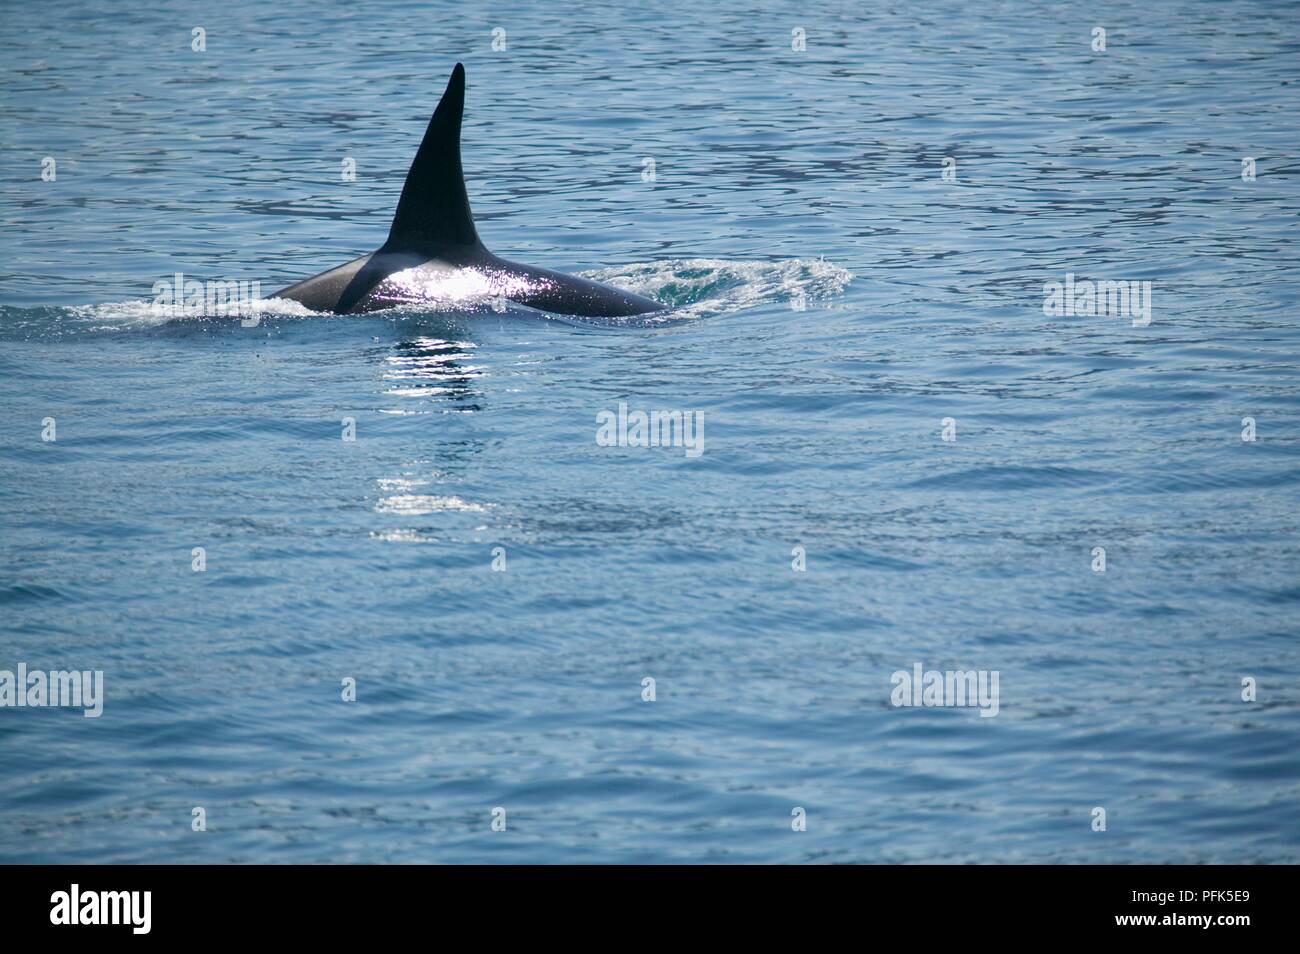 USA, Alaska, dorsal fin of Killer whale (Orcinus orca) surfacing from water Stock Photo